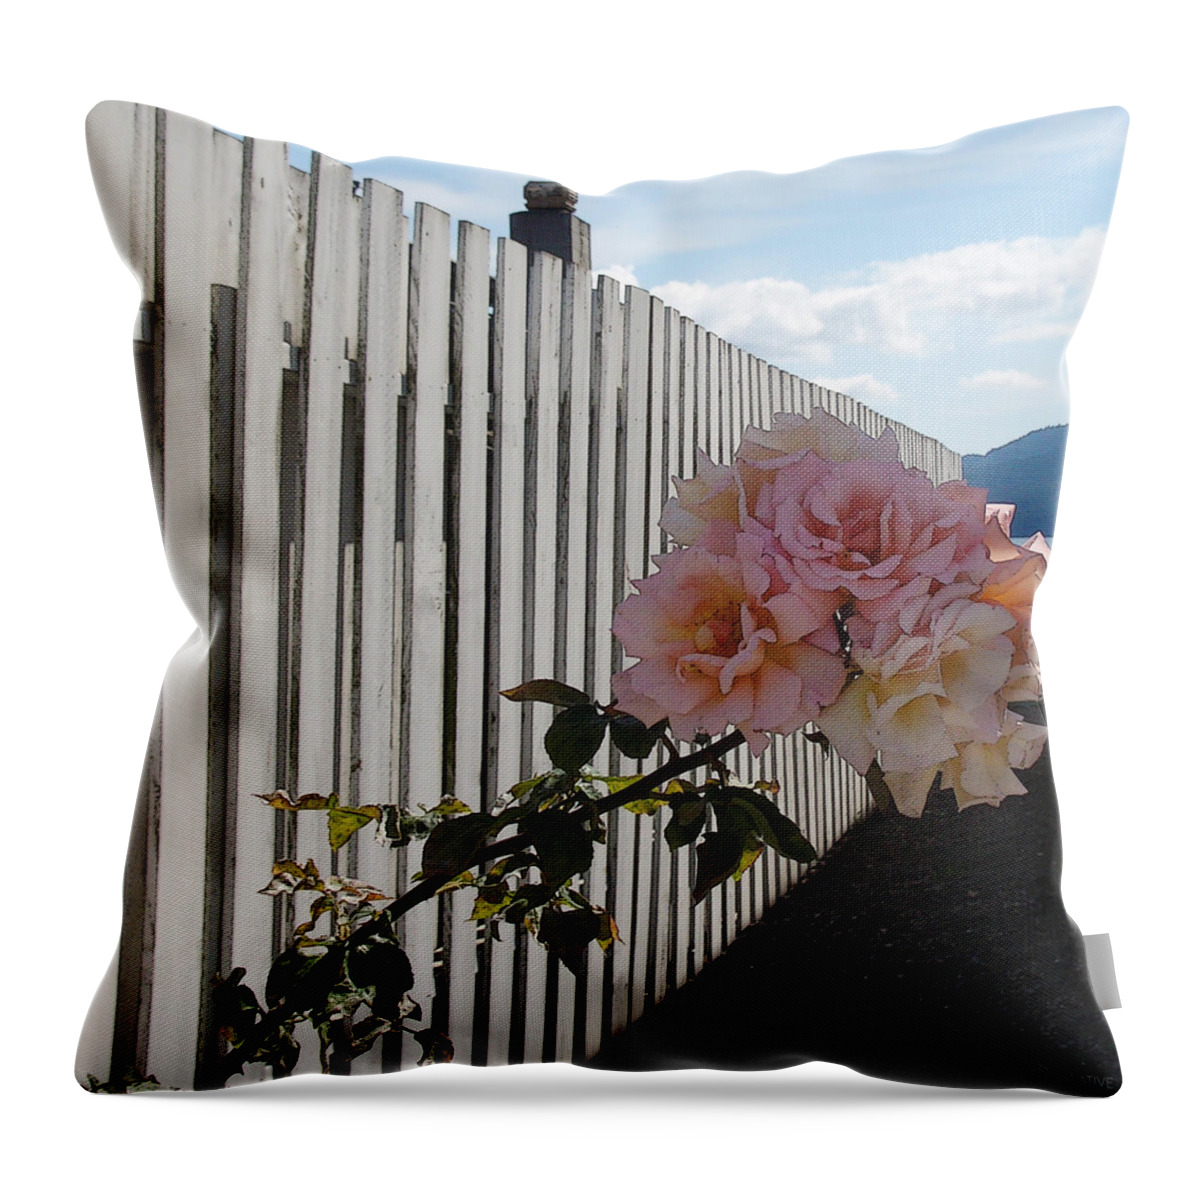 Rose Throw Pillow featuring the photograph Orcas Island Rose #1 by Tim Nyberg